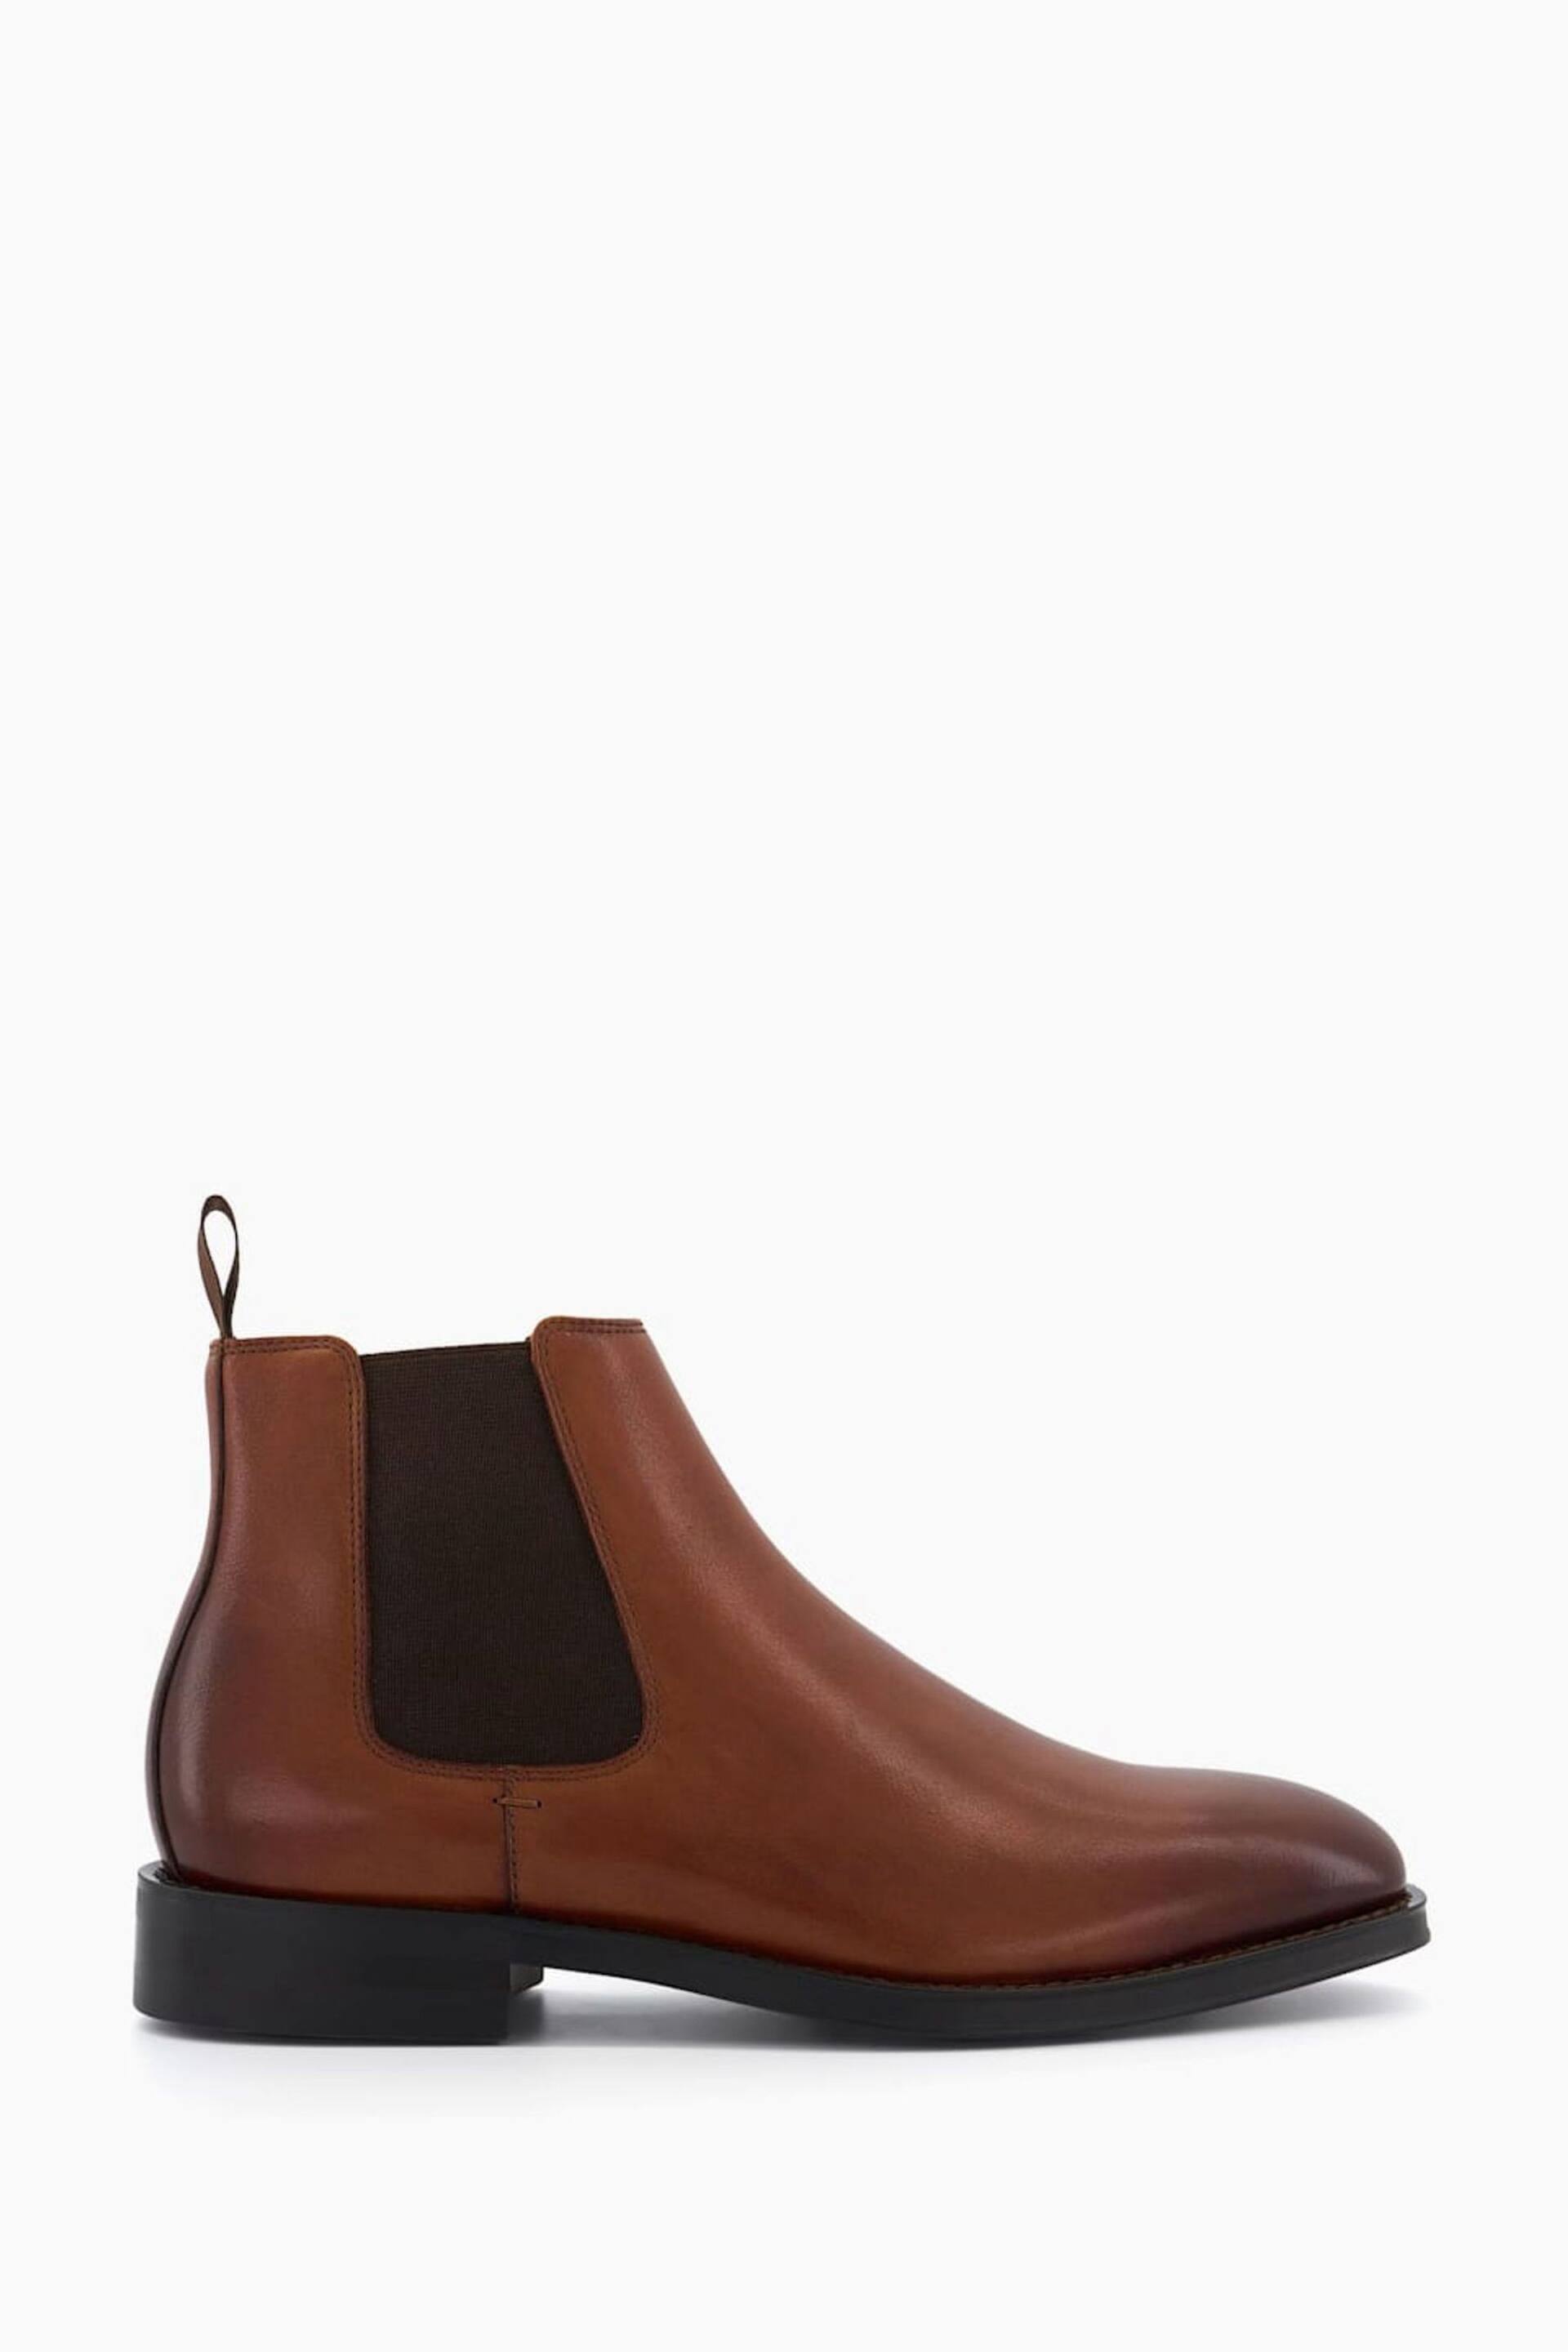 Dune London Brown Masons Sole Chelsea Boots - Image 1 of 5